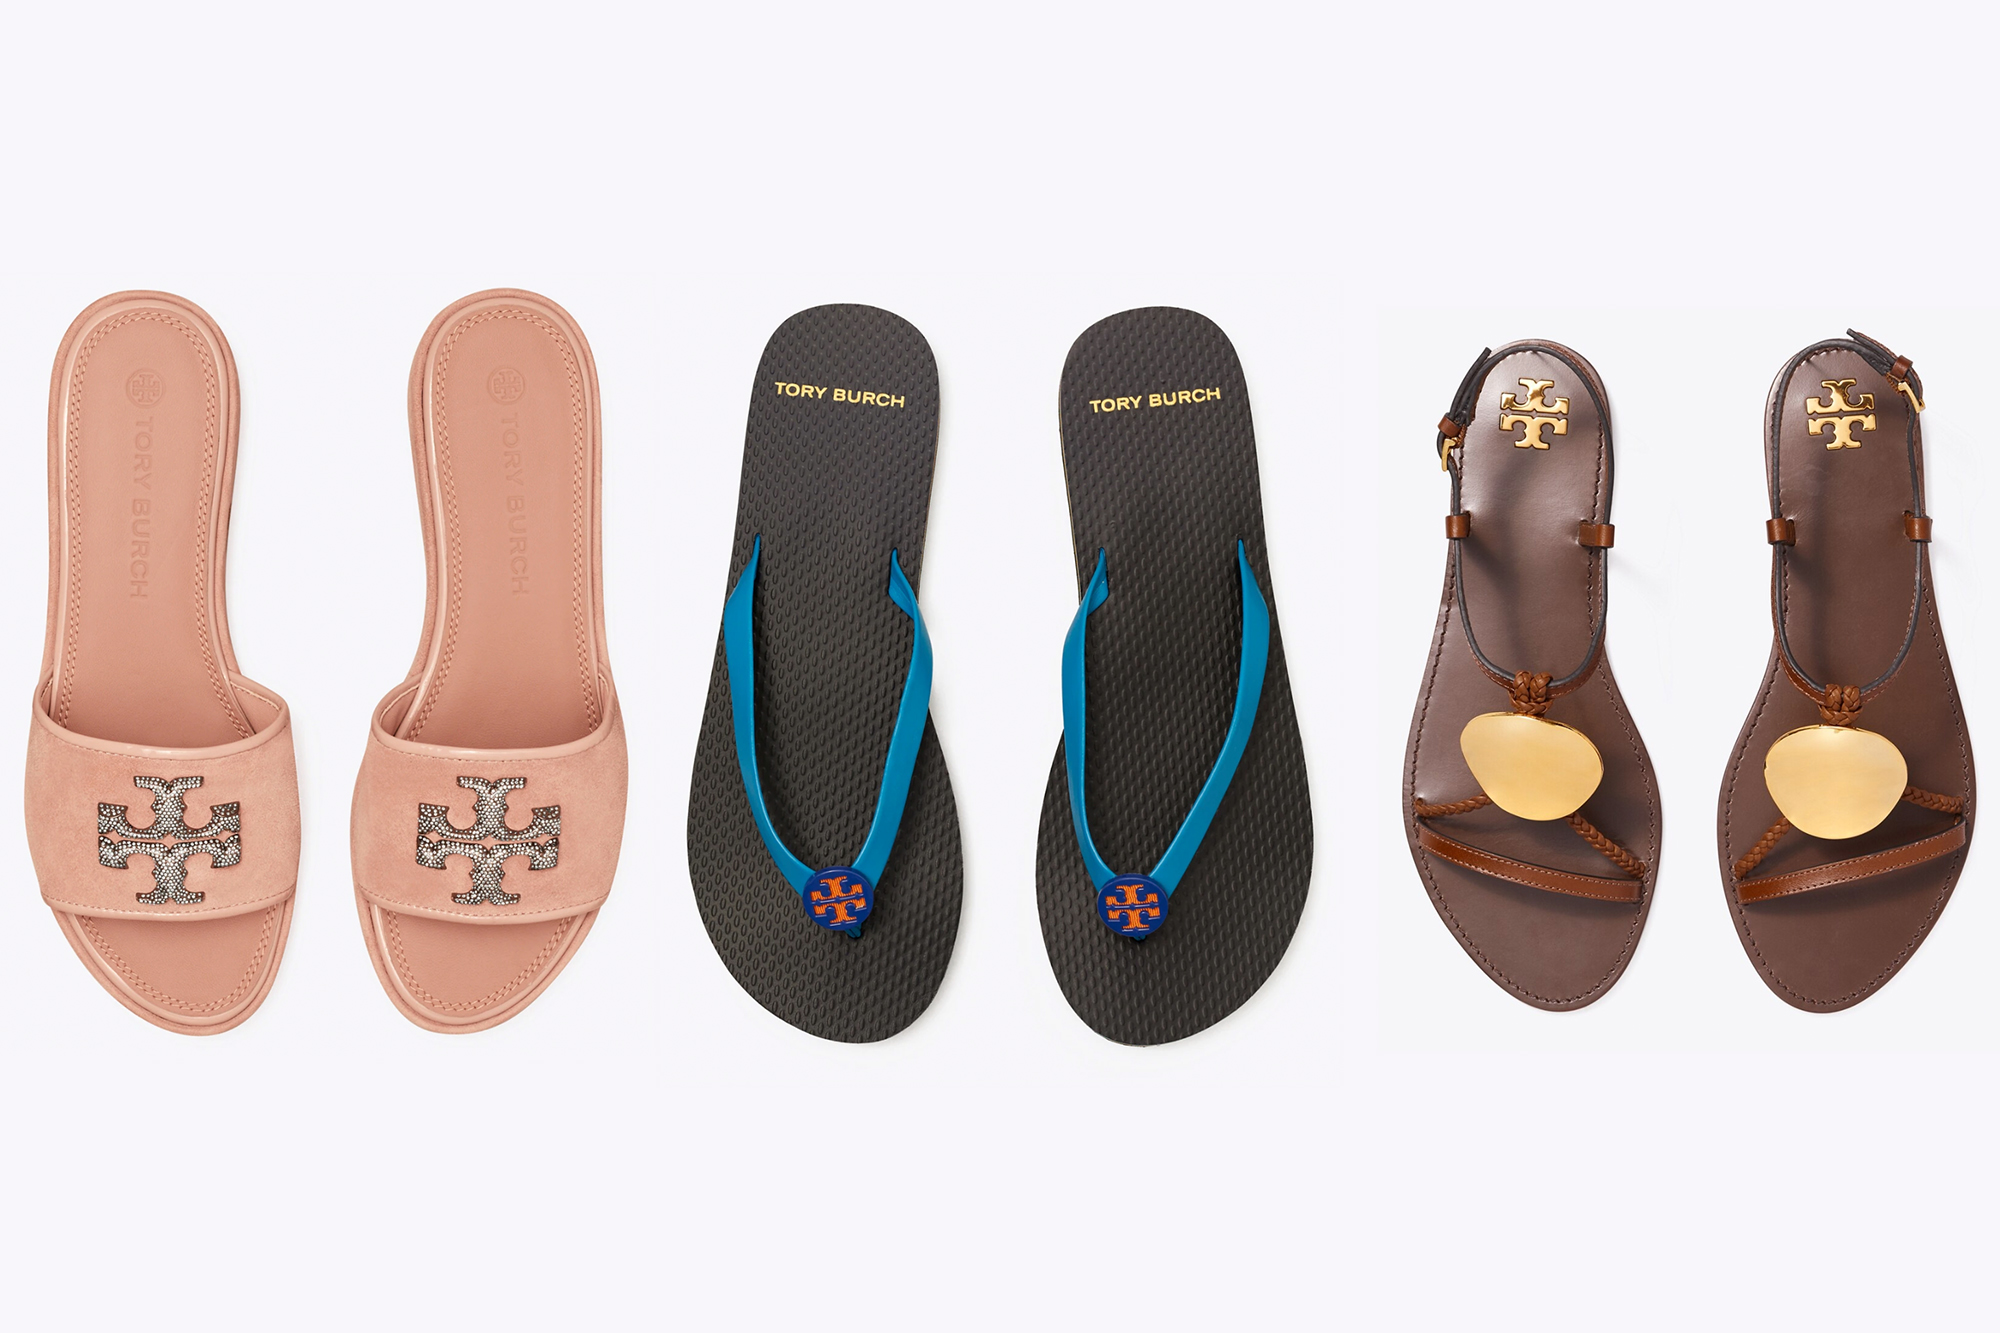 Tory Burch Has So Many Sandals on Major Sale — Starting at $49